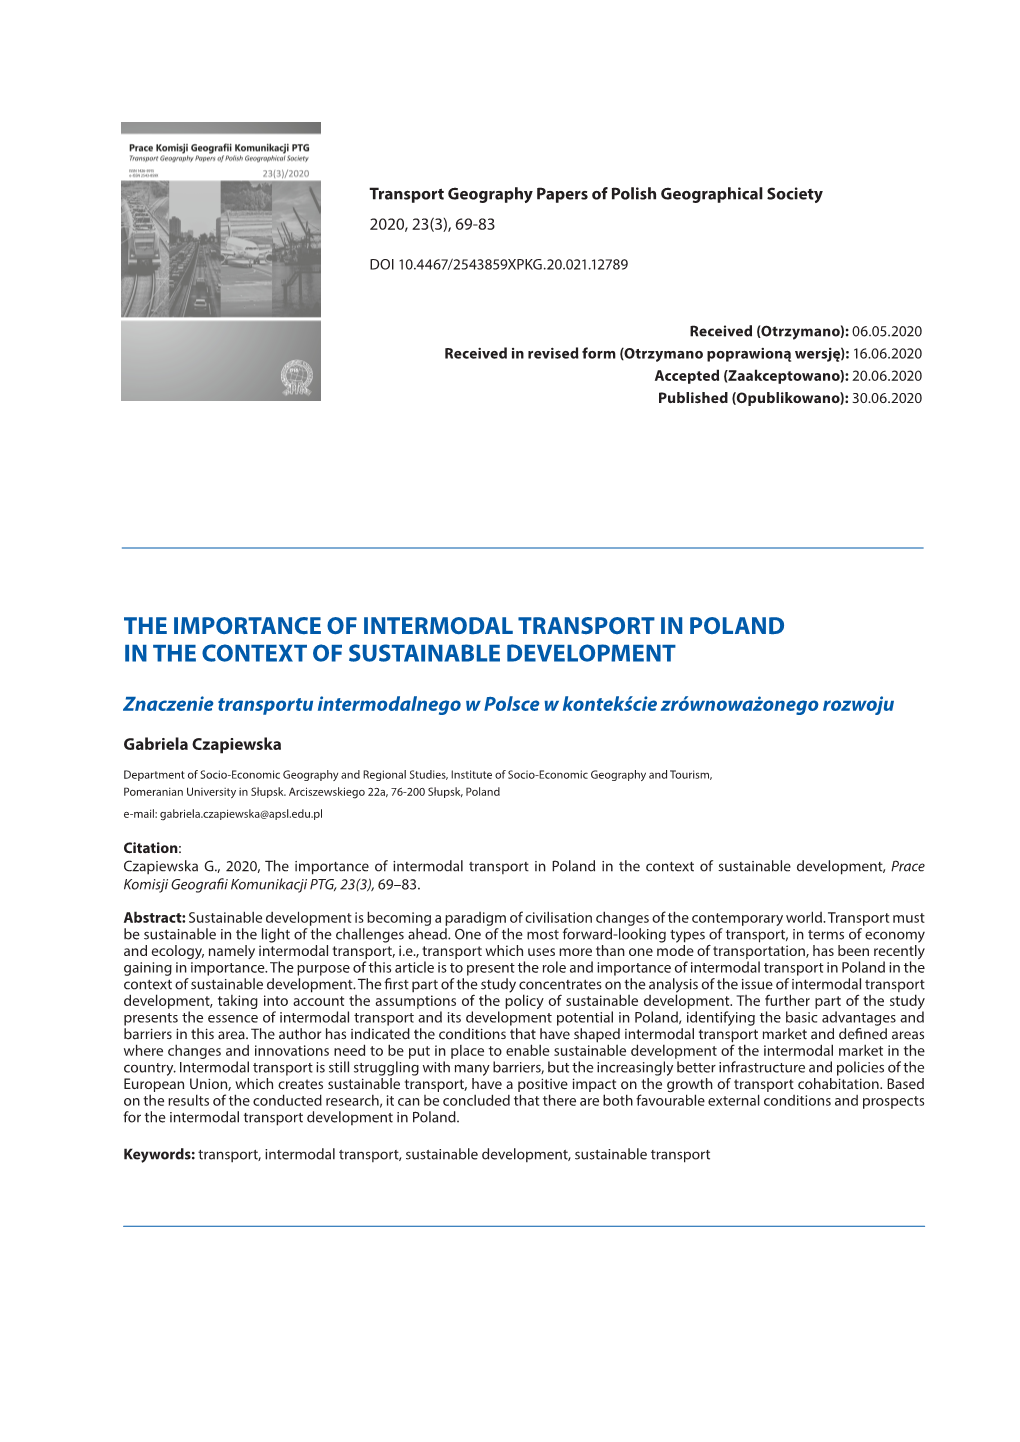 The Importance of Intermodal Transport in Poland in the Context of Sustainable Development